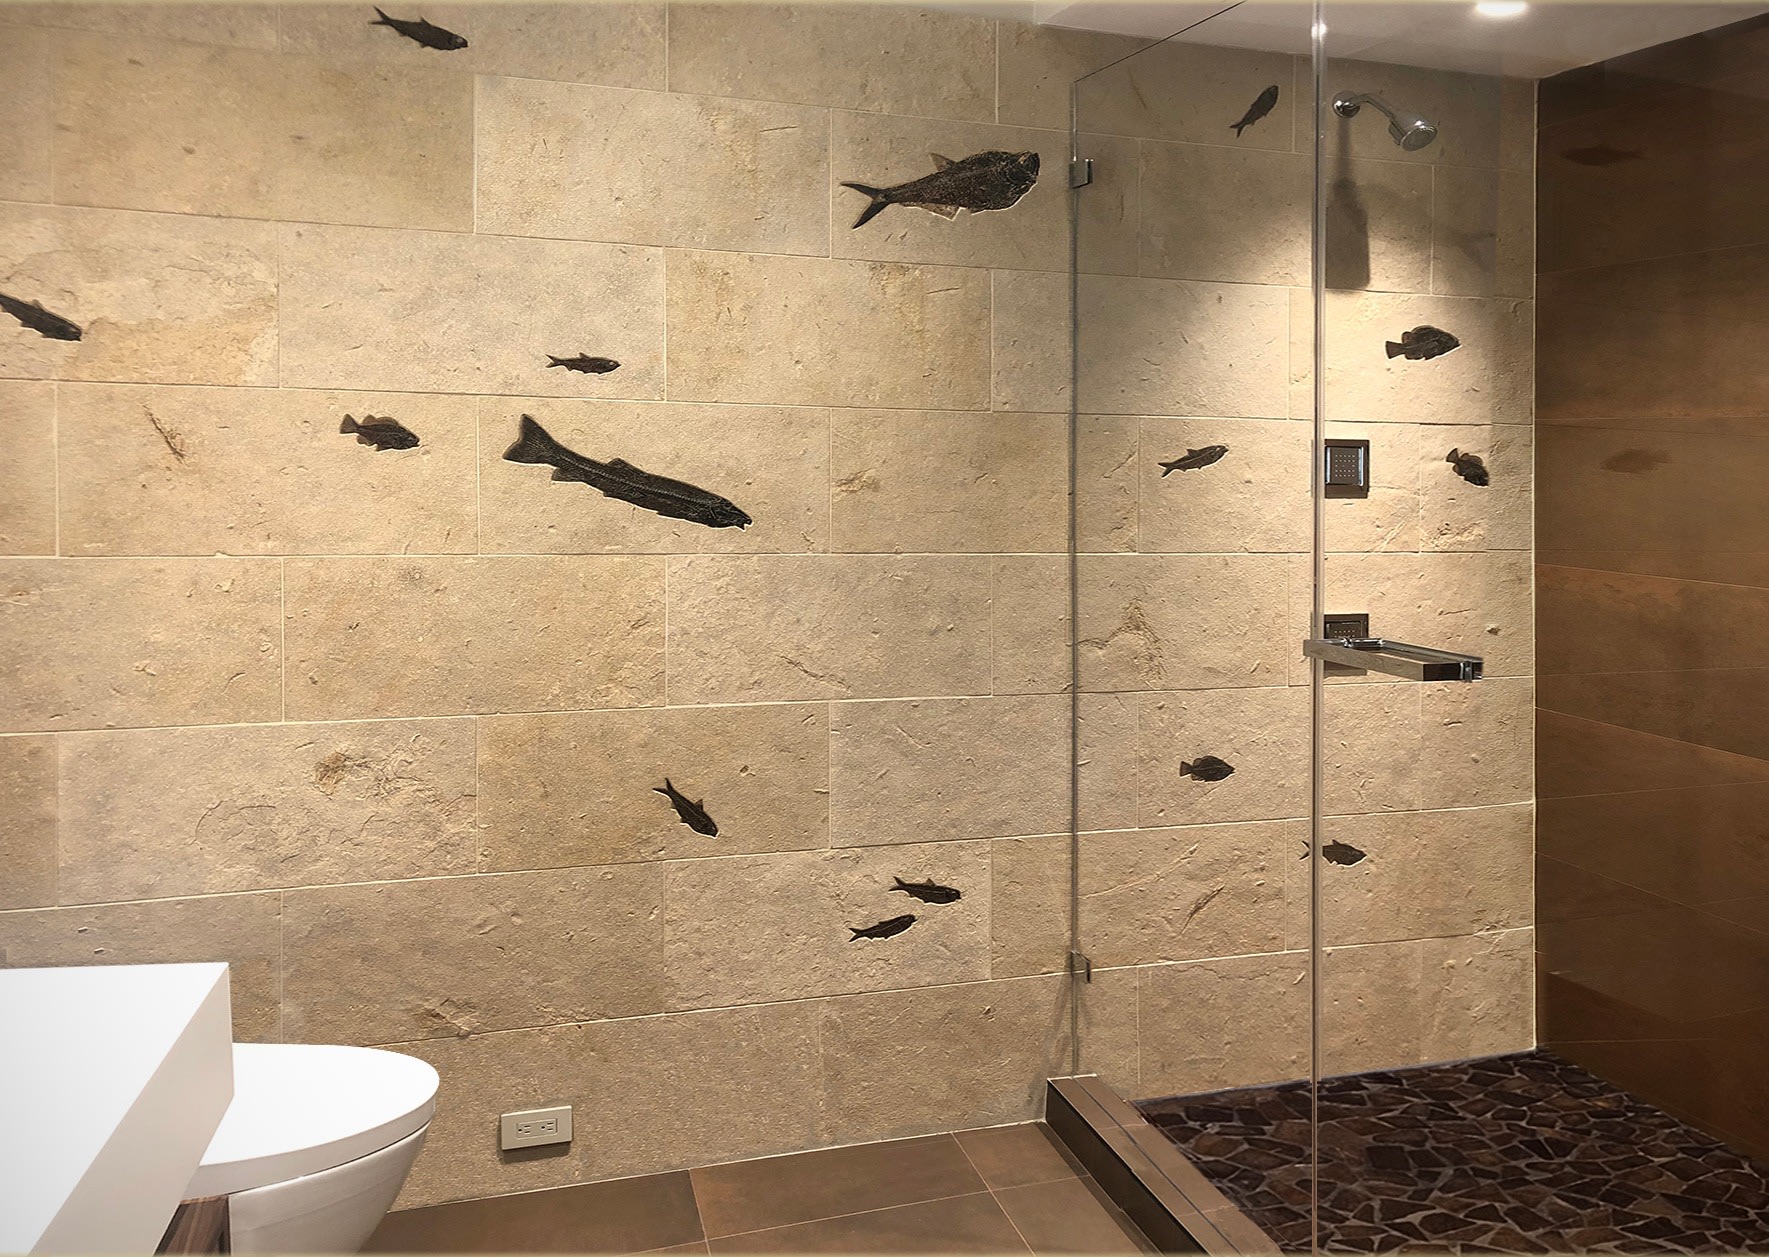 A fossil tile wall containing large and small fossil fish is used as a feature wall in a modern bathroom